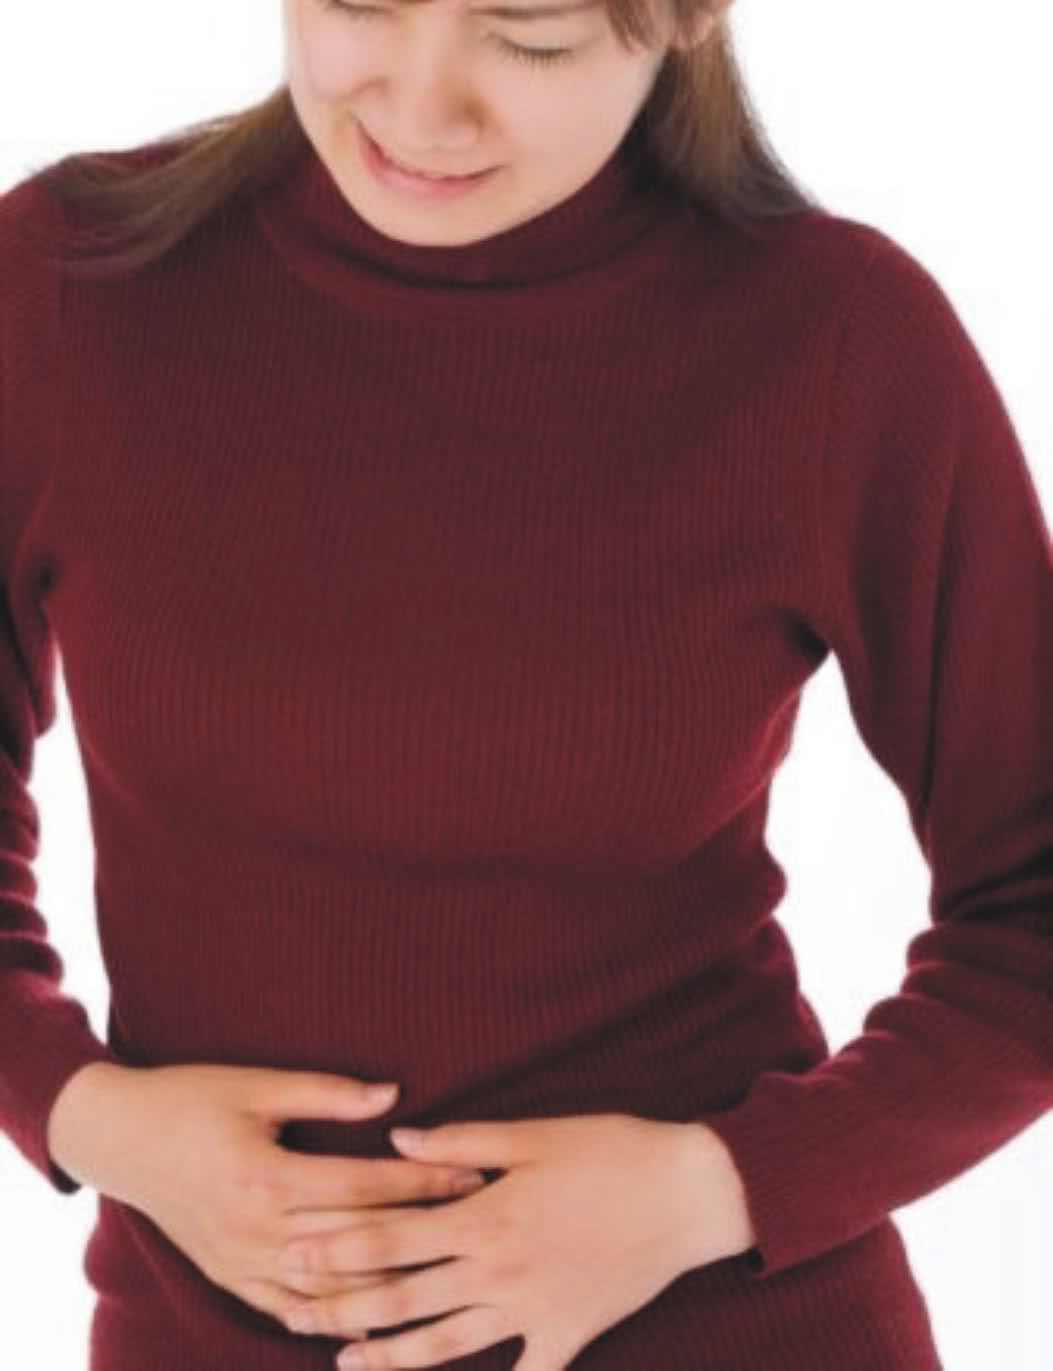 Woman with stomach pain from Celiac Disease